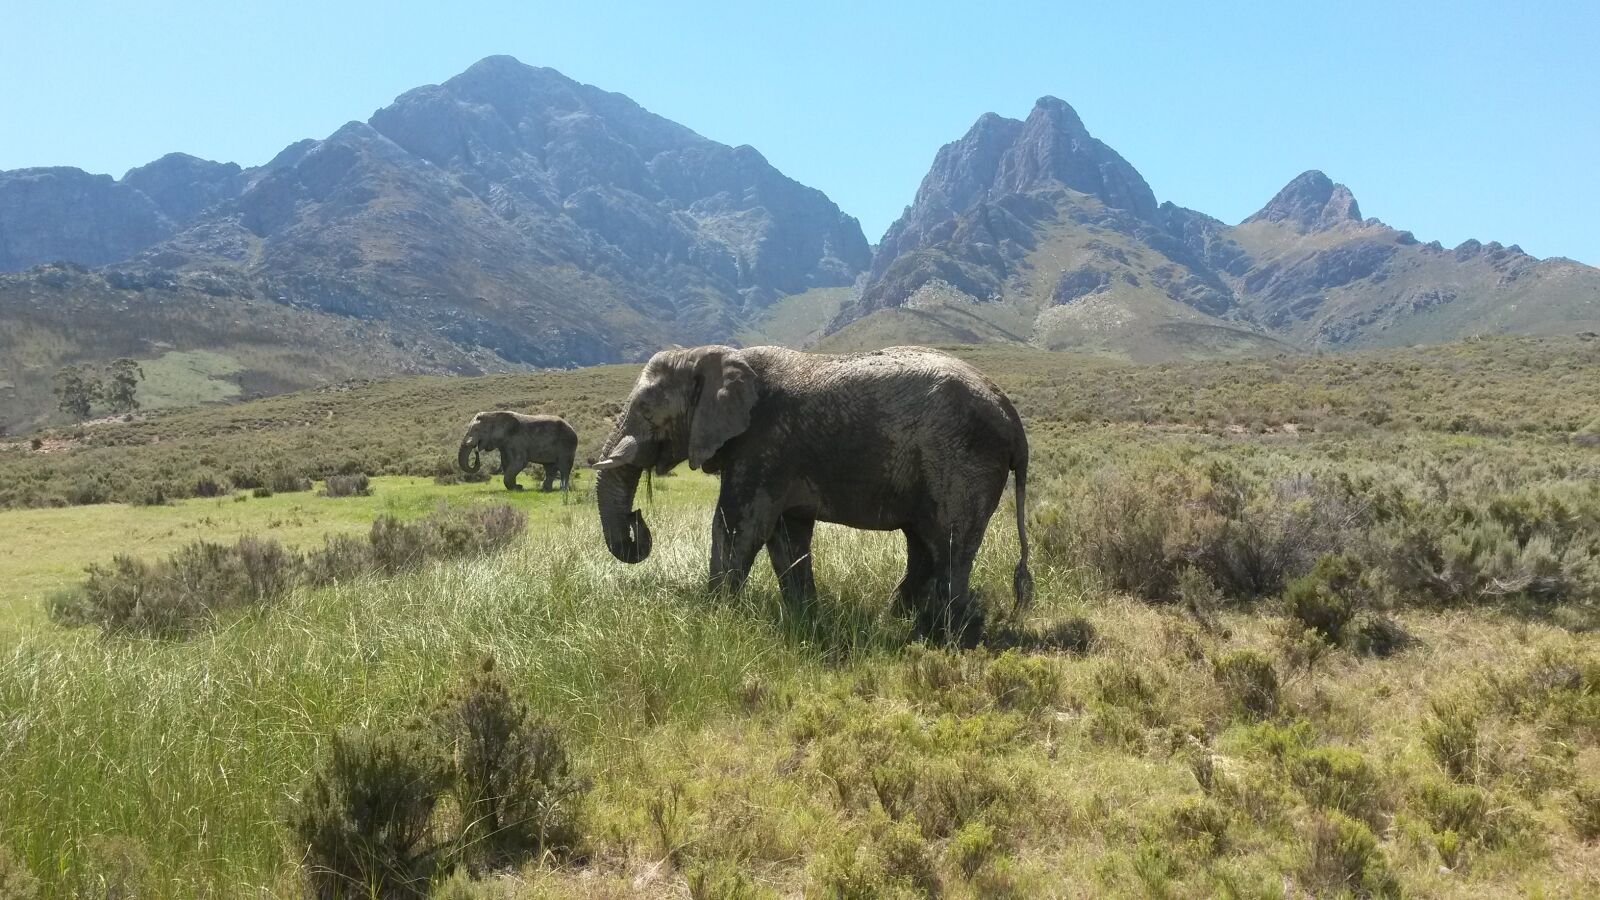 Samsung Galaxy S4 Mini sample photo. Elephant, south africa, largest photography